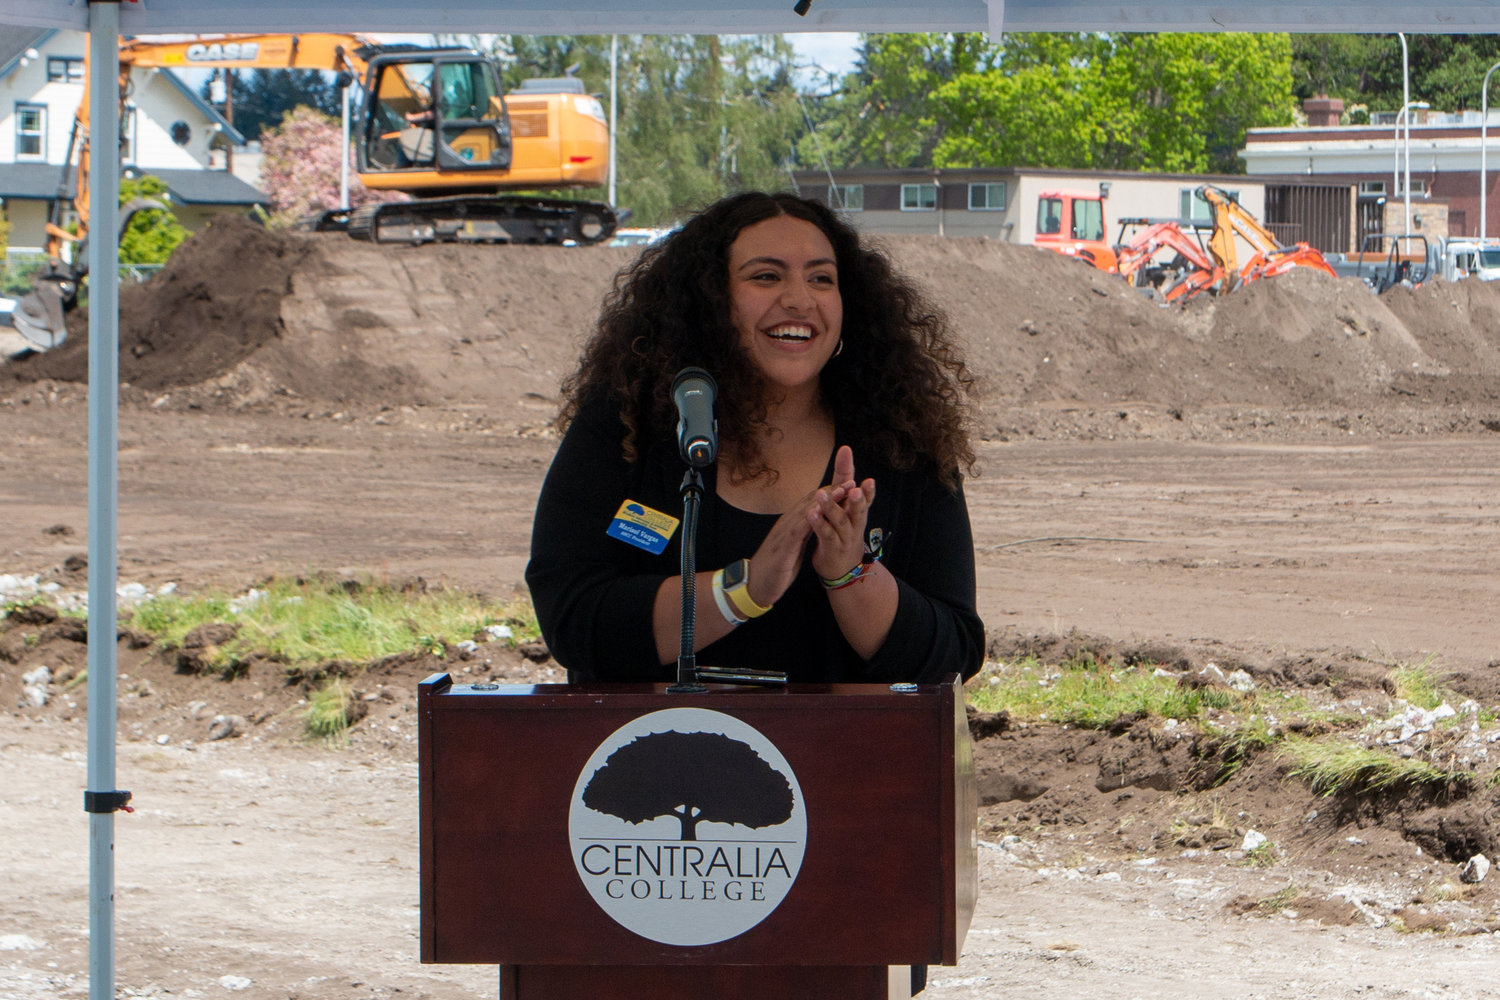 Marisol Vargas, student body president, gives a round of applause to those involved in the years of work to make the athletic field possible during the groundbreaking ceremony held Wednesday afternoon.